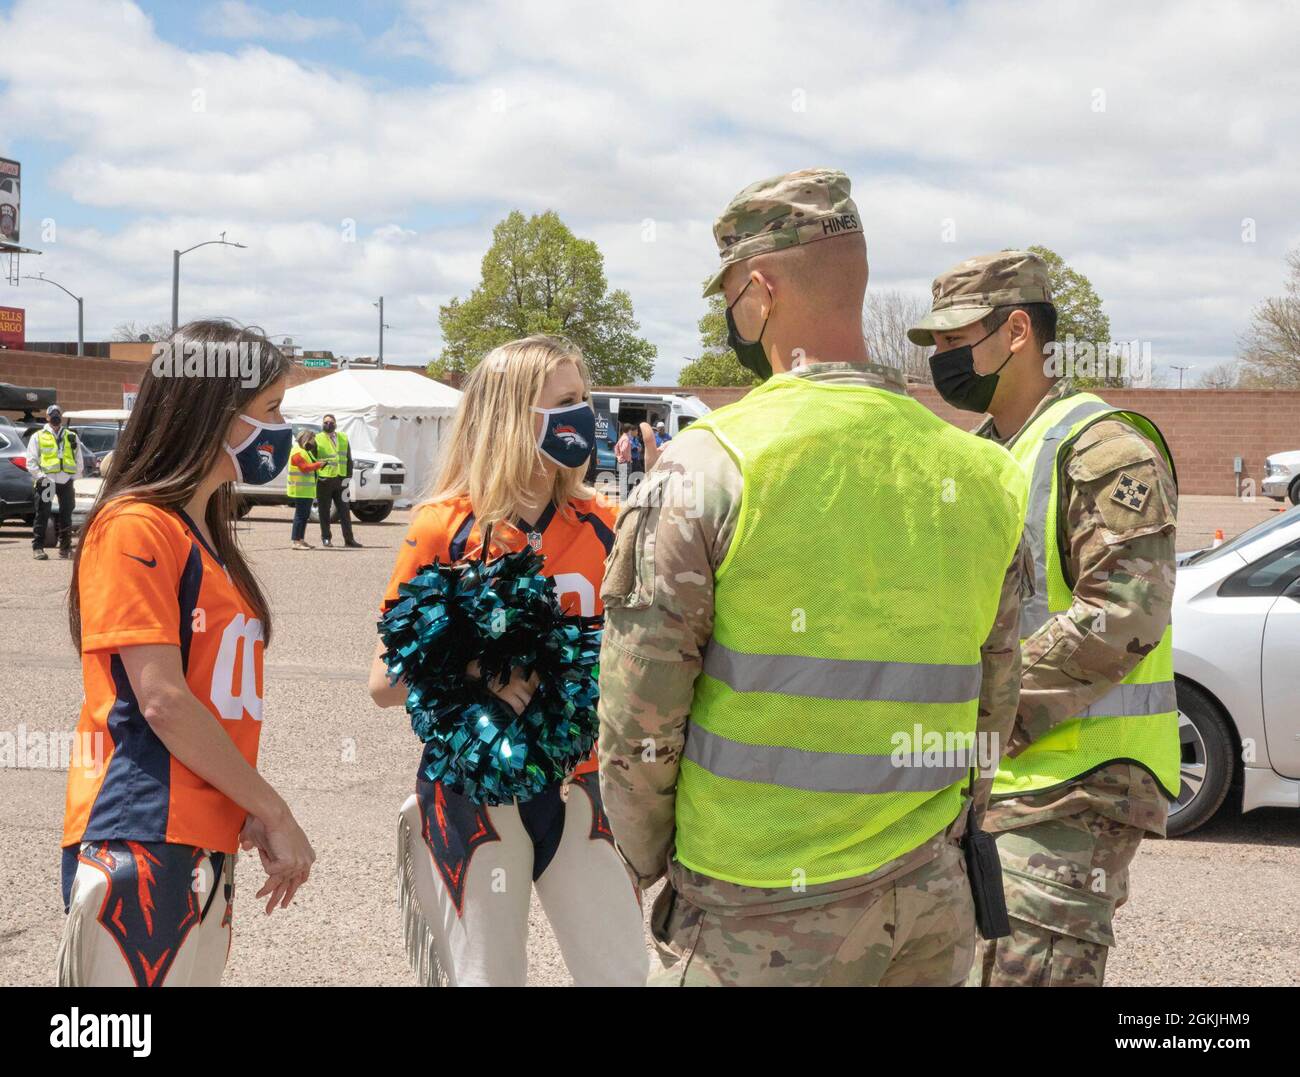 U.S. Army Sgt. James Hines, middle right, and U.S. Army Pfc. Eloy Martinez, far right, cavalry scouts assigned to 3rd Squadron, 61st Calvary Regiment, speak with cheerleaders of the Denver Broncos at the Community Vaccination Center (CVC) at the Colorado State Fairgrounds in Pueblo, Colorado, May 4, 2021. The Denver Broncos mascot and cheerleaders visited the Pueblo CVC to support Soldiers and community members. U.S. Northern Command, through U.S. Army North, remains committed to providing continued, flexible Department of Defense support to the Federal Emergency Management Agency as part of t Stock Photo